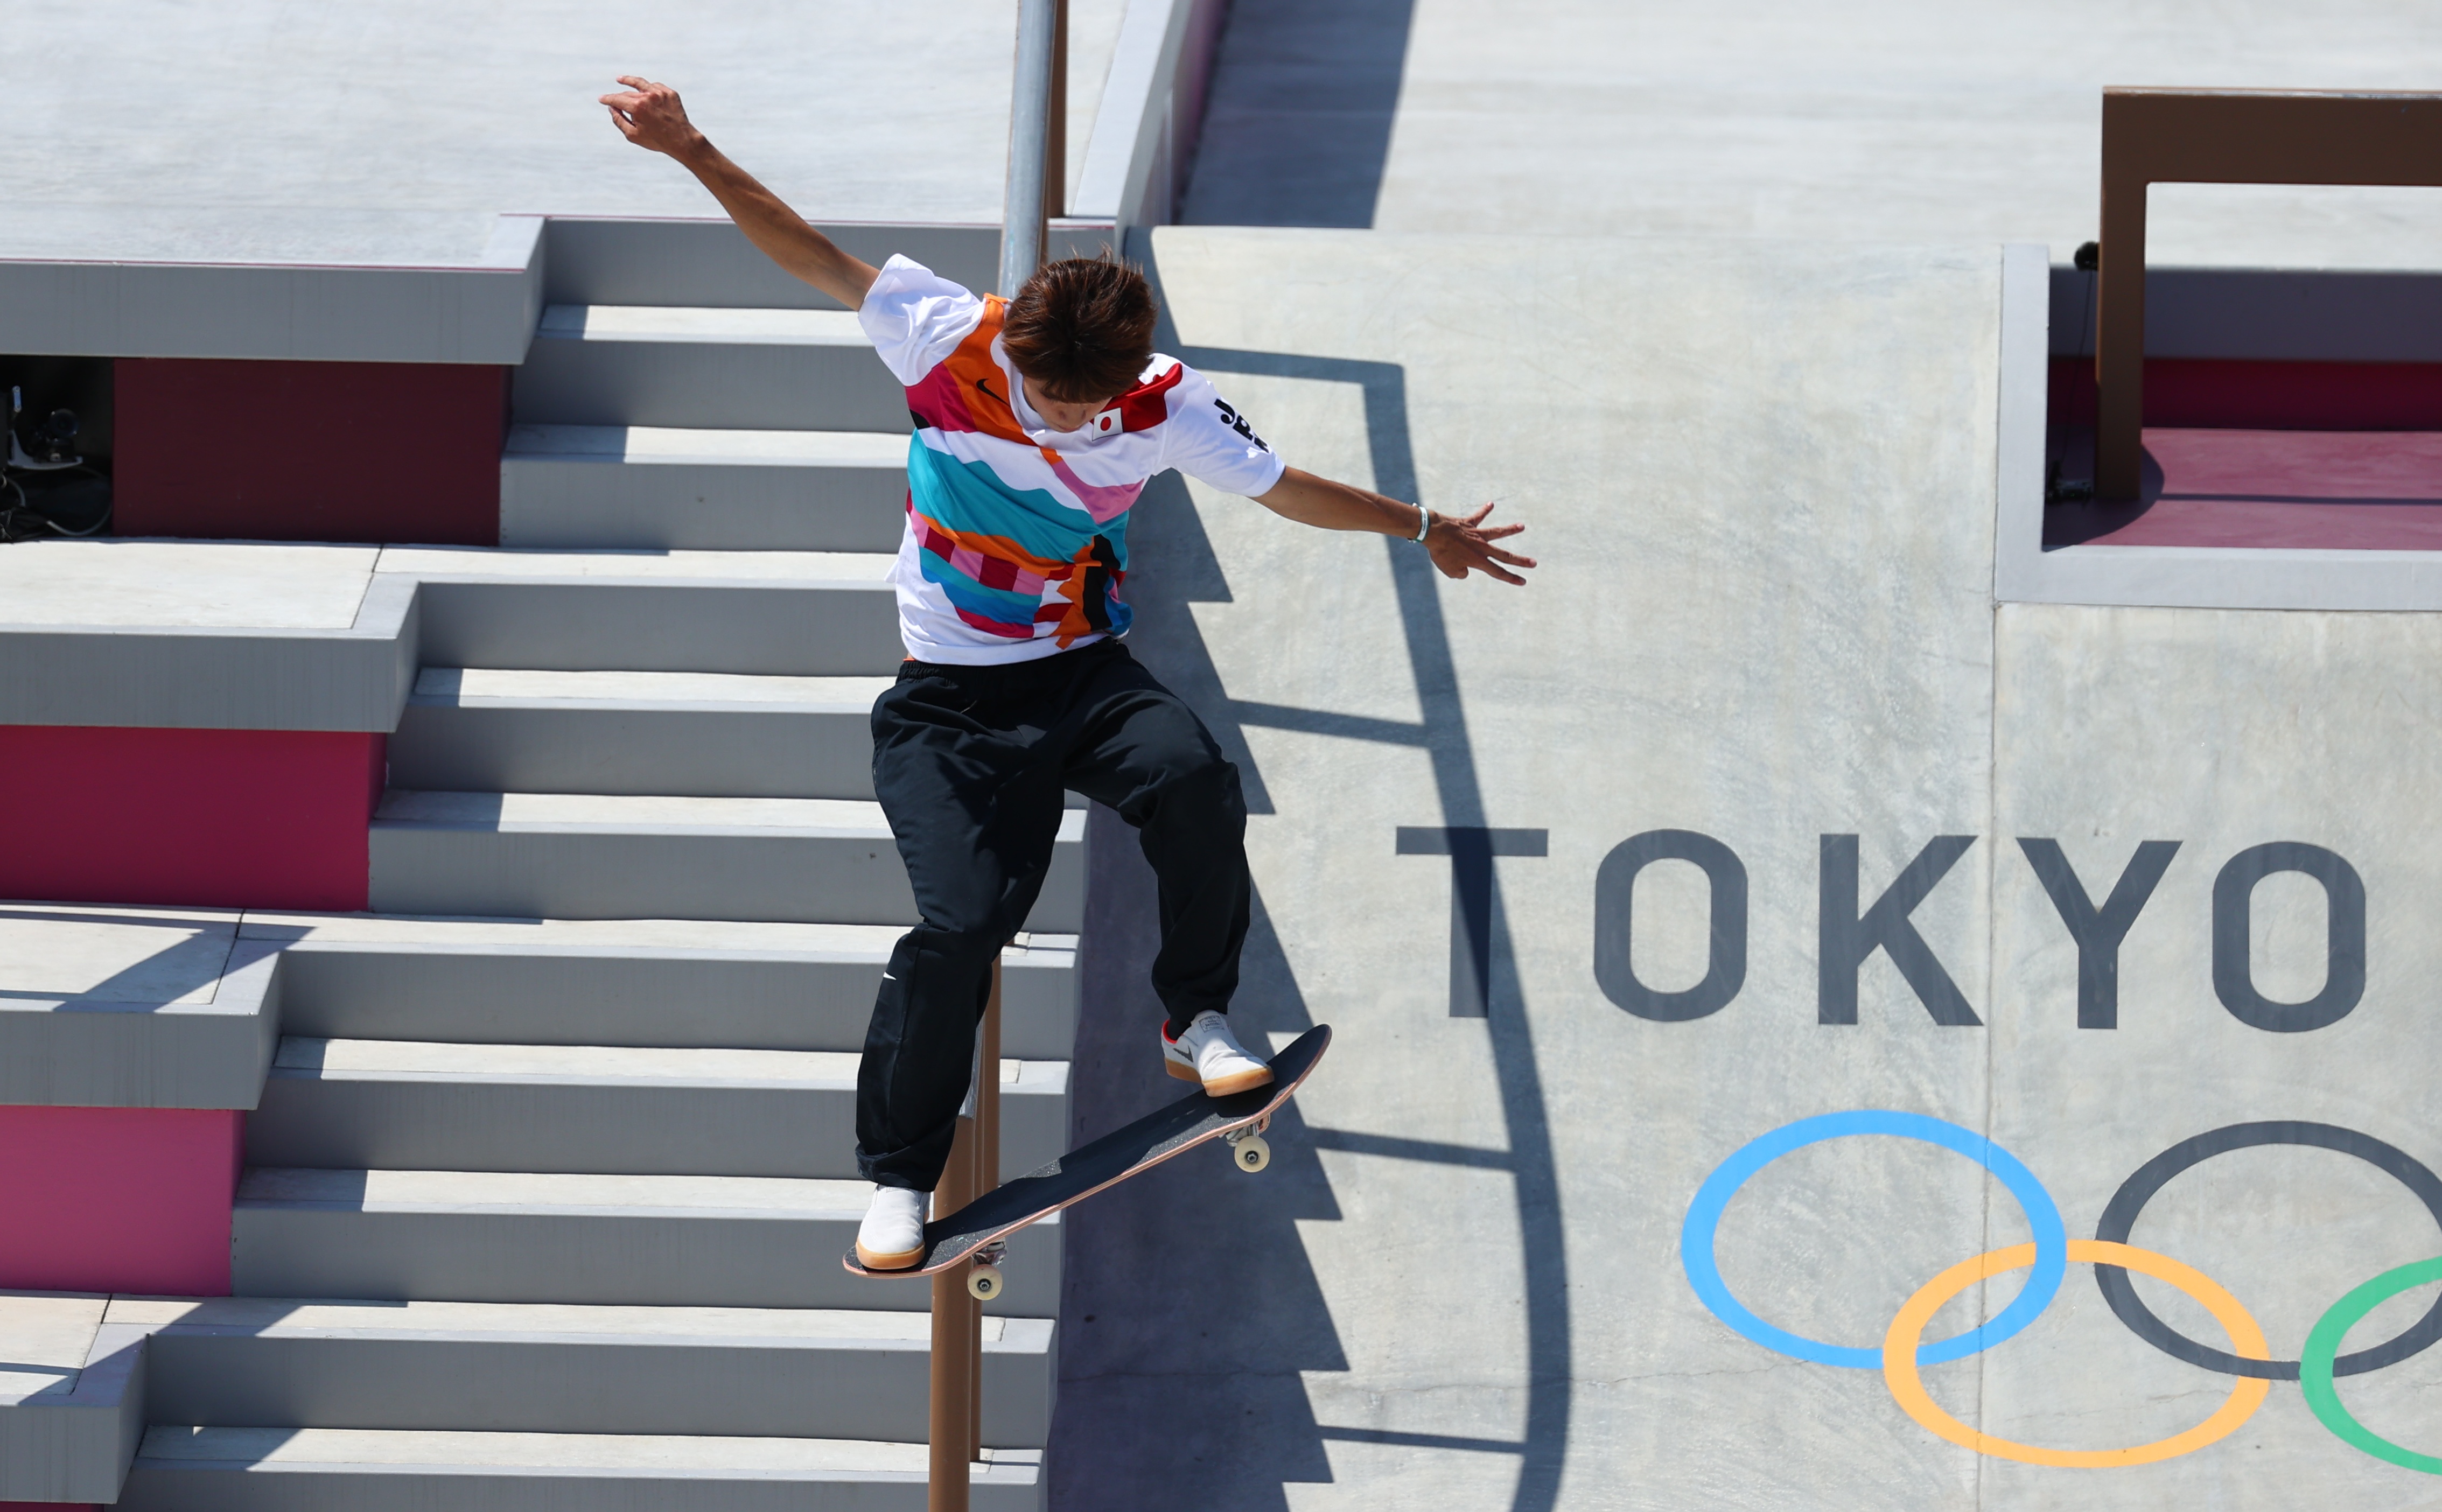 OpEd: Skateboarding debut in Tokyo misses the mark as a television event